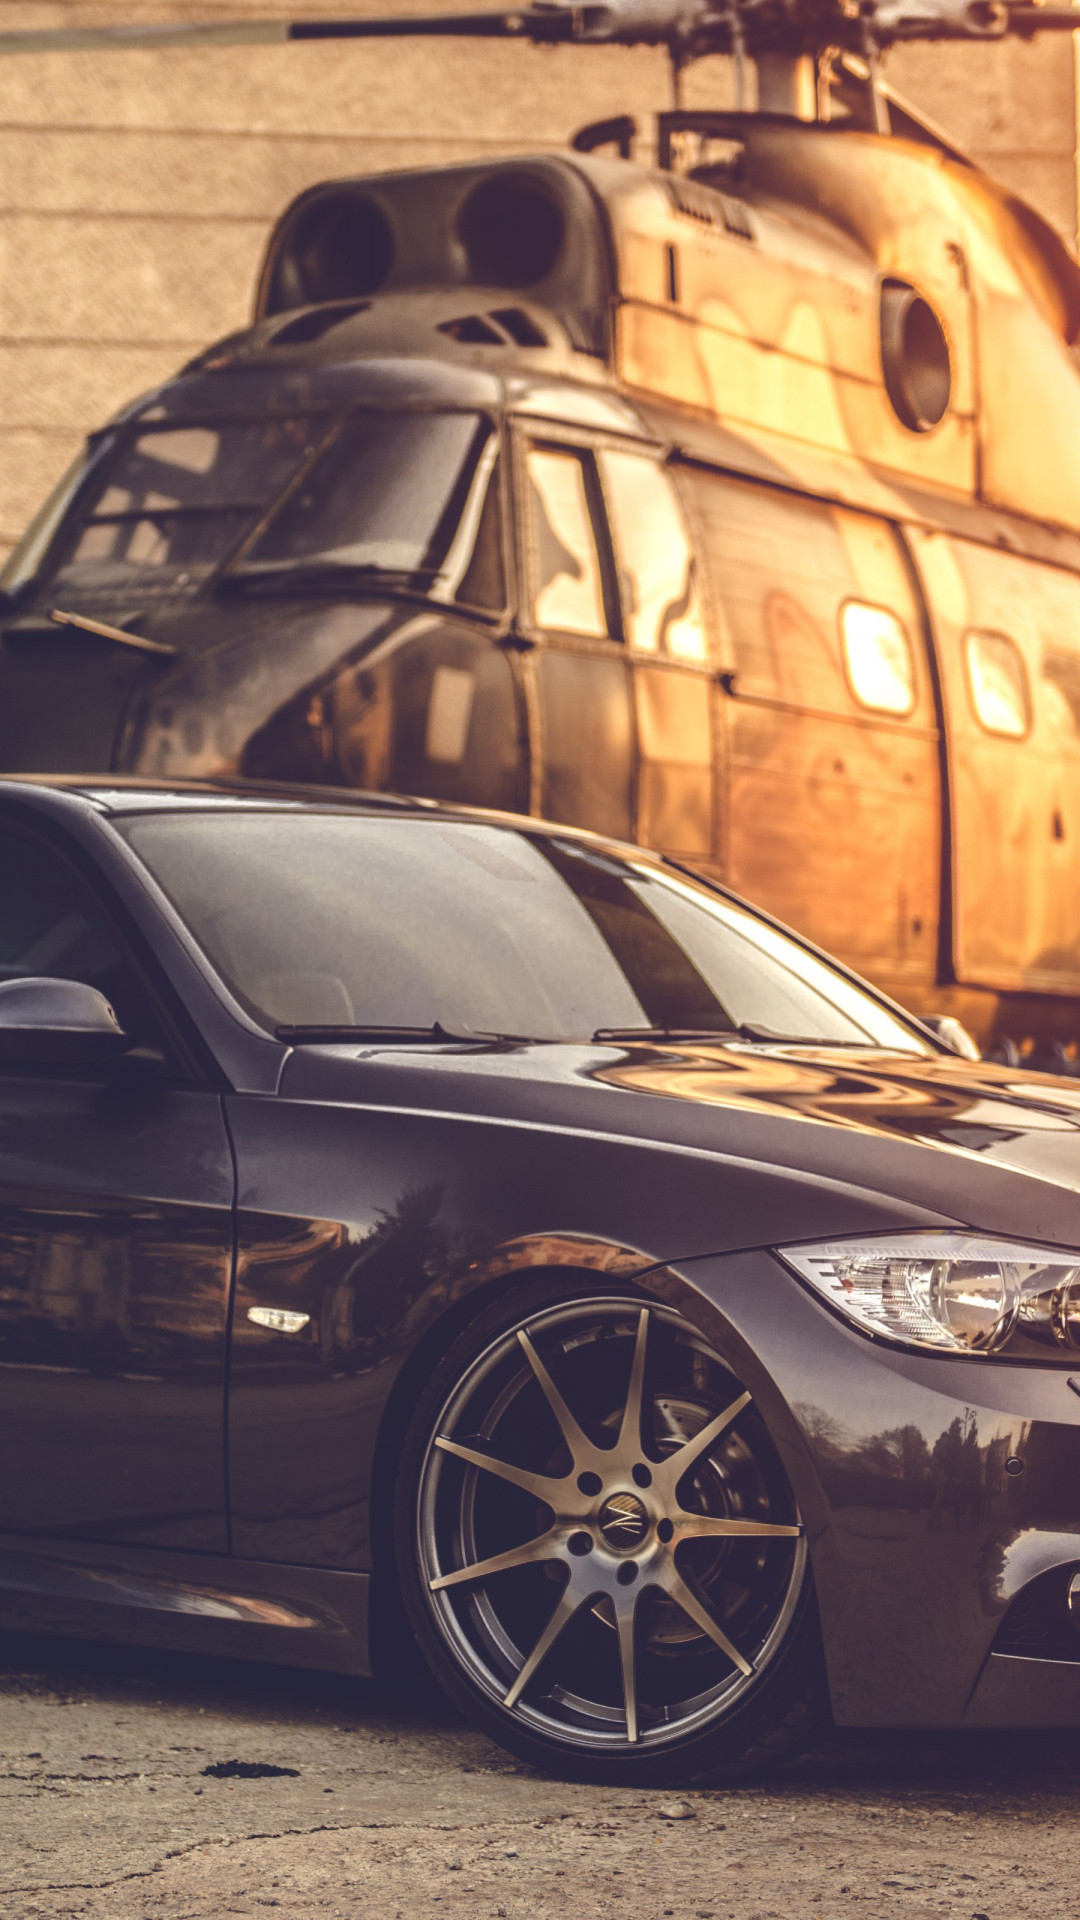 BMW E90 and one helicopter wallpaper 1080x1920